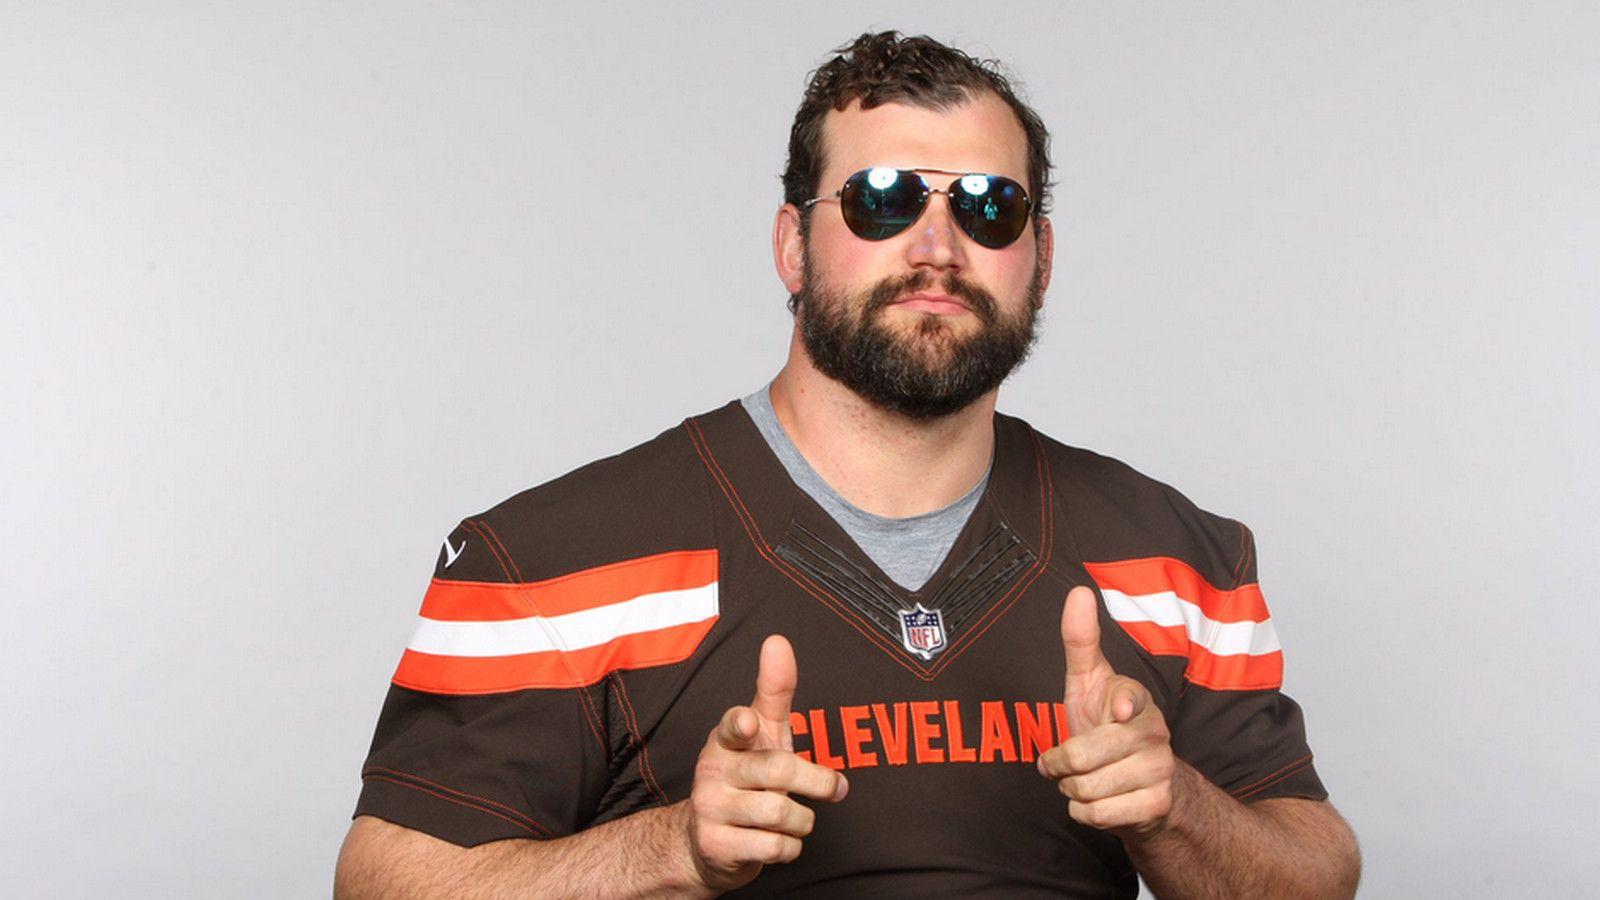 Joe Thomas continues to have fun with annual photo By Nature